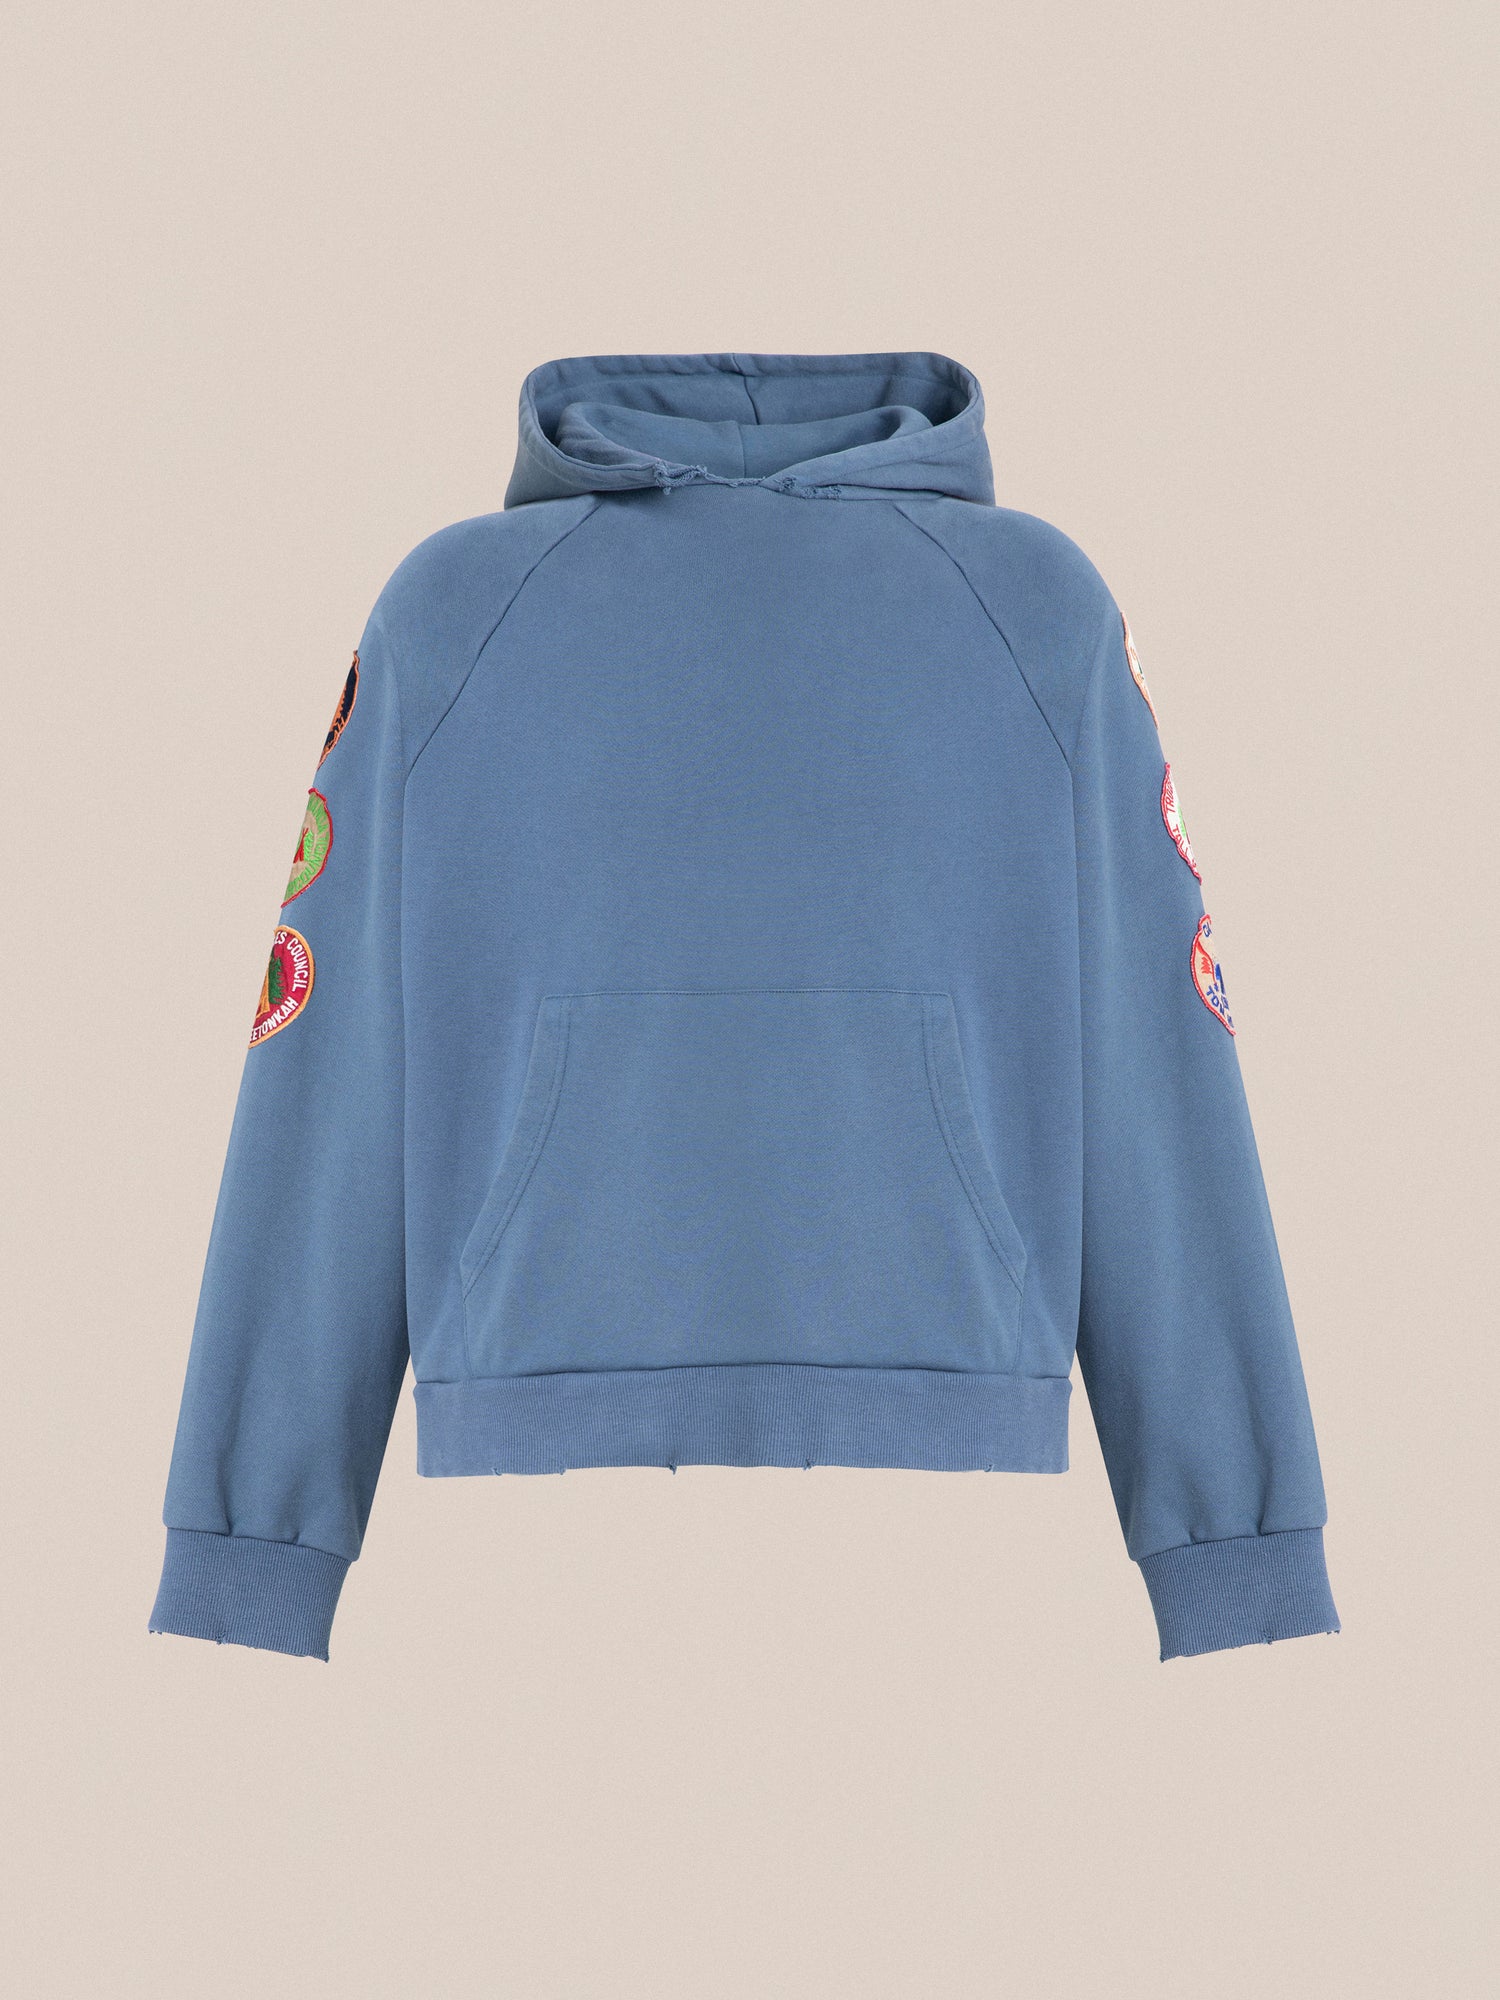 A blue hooded Found Timber Campground Hoodie with embroidered patches and distressed details.